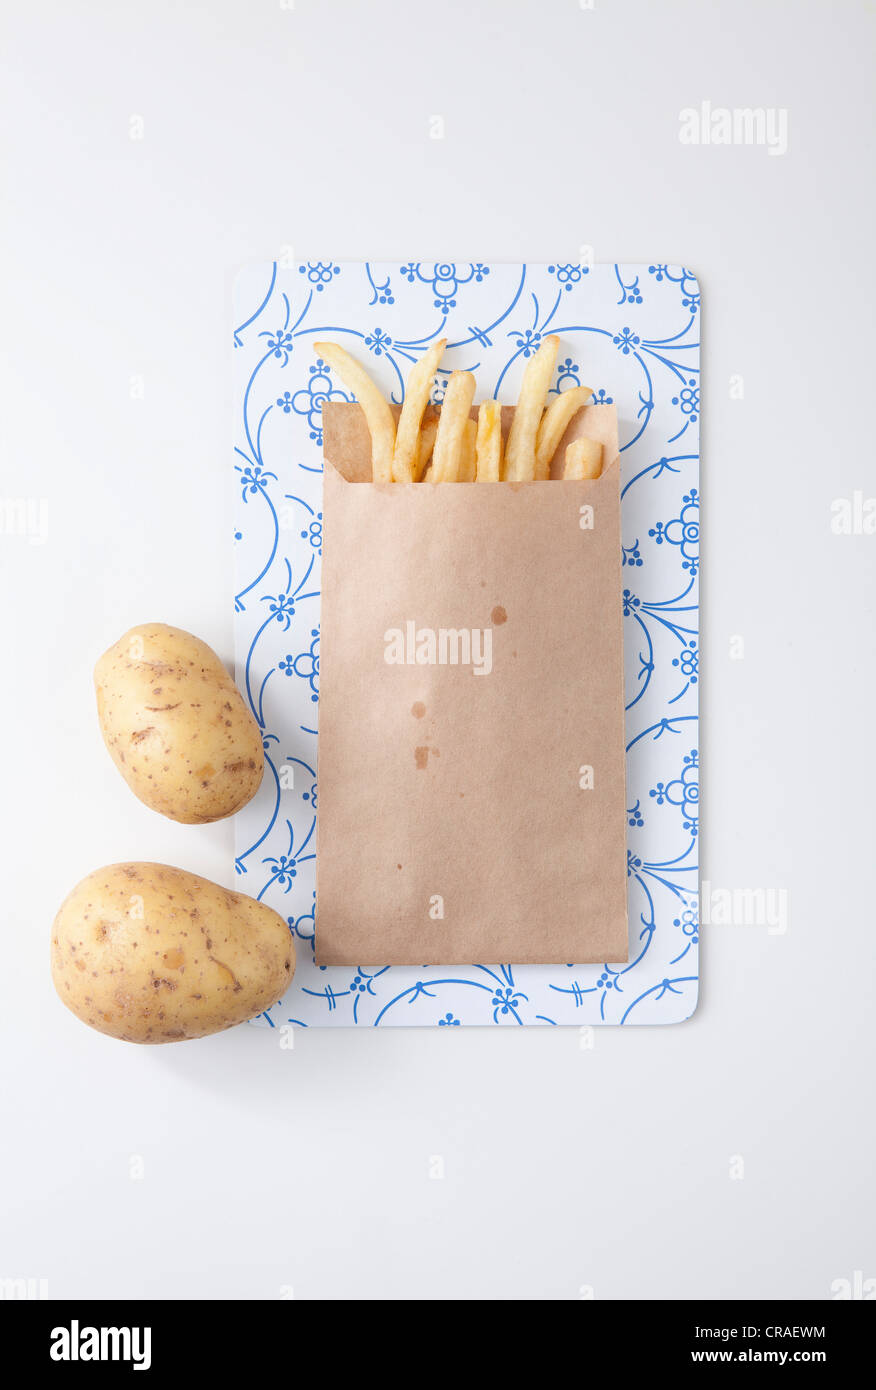 Shoestring French Fries In White Paper Bag On Picnic Table Stock